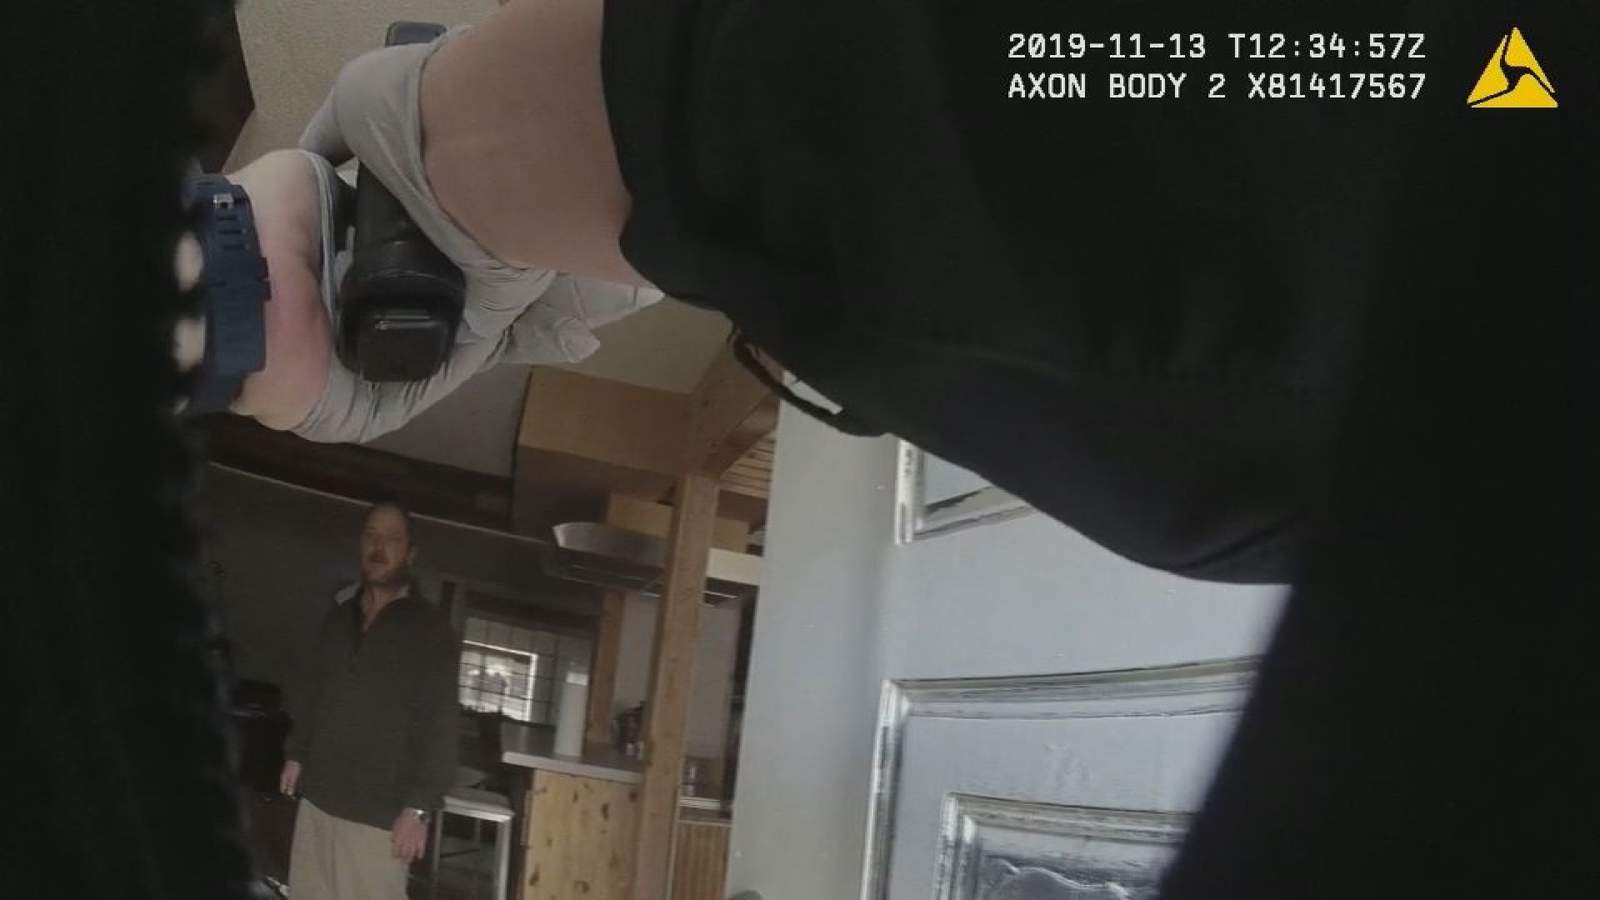 Body camera video of police involved shooting released